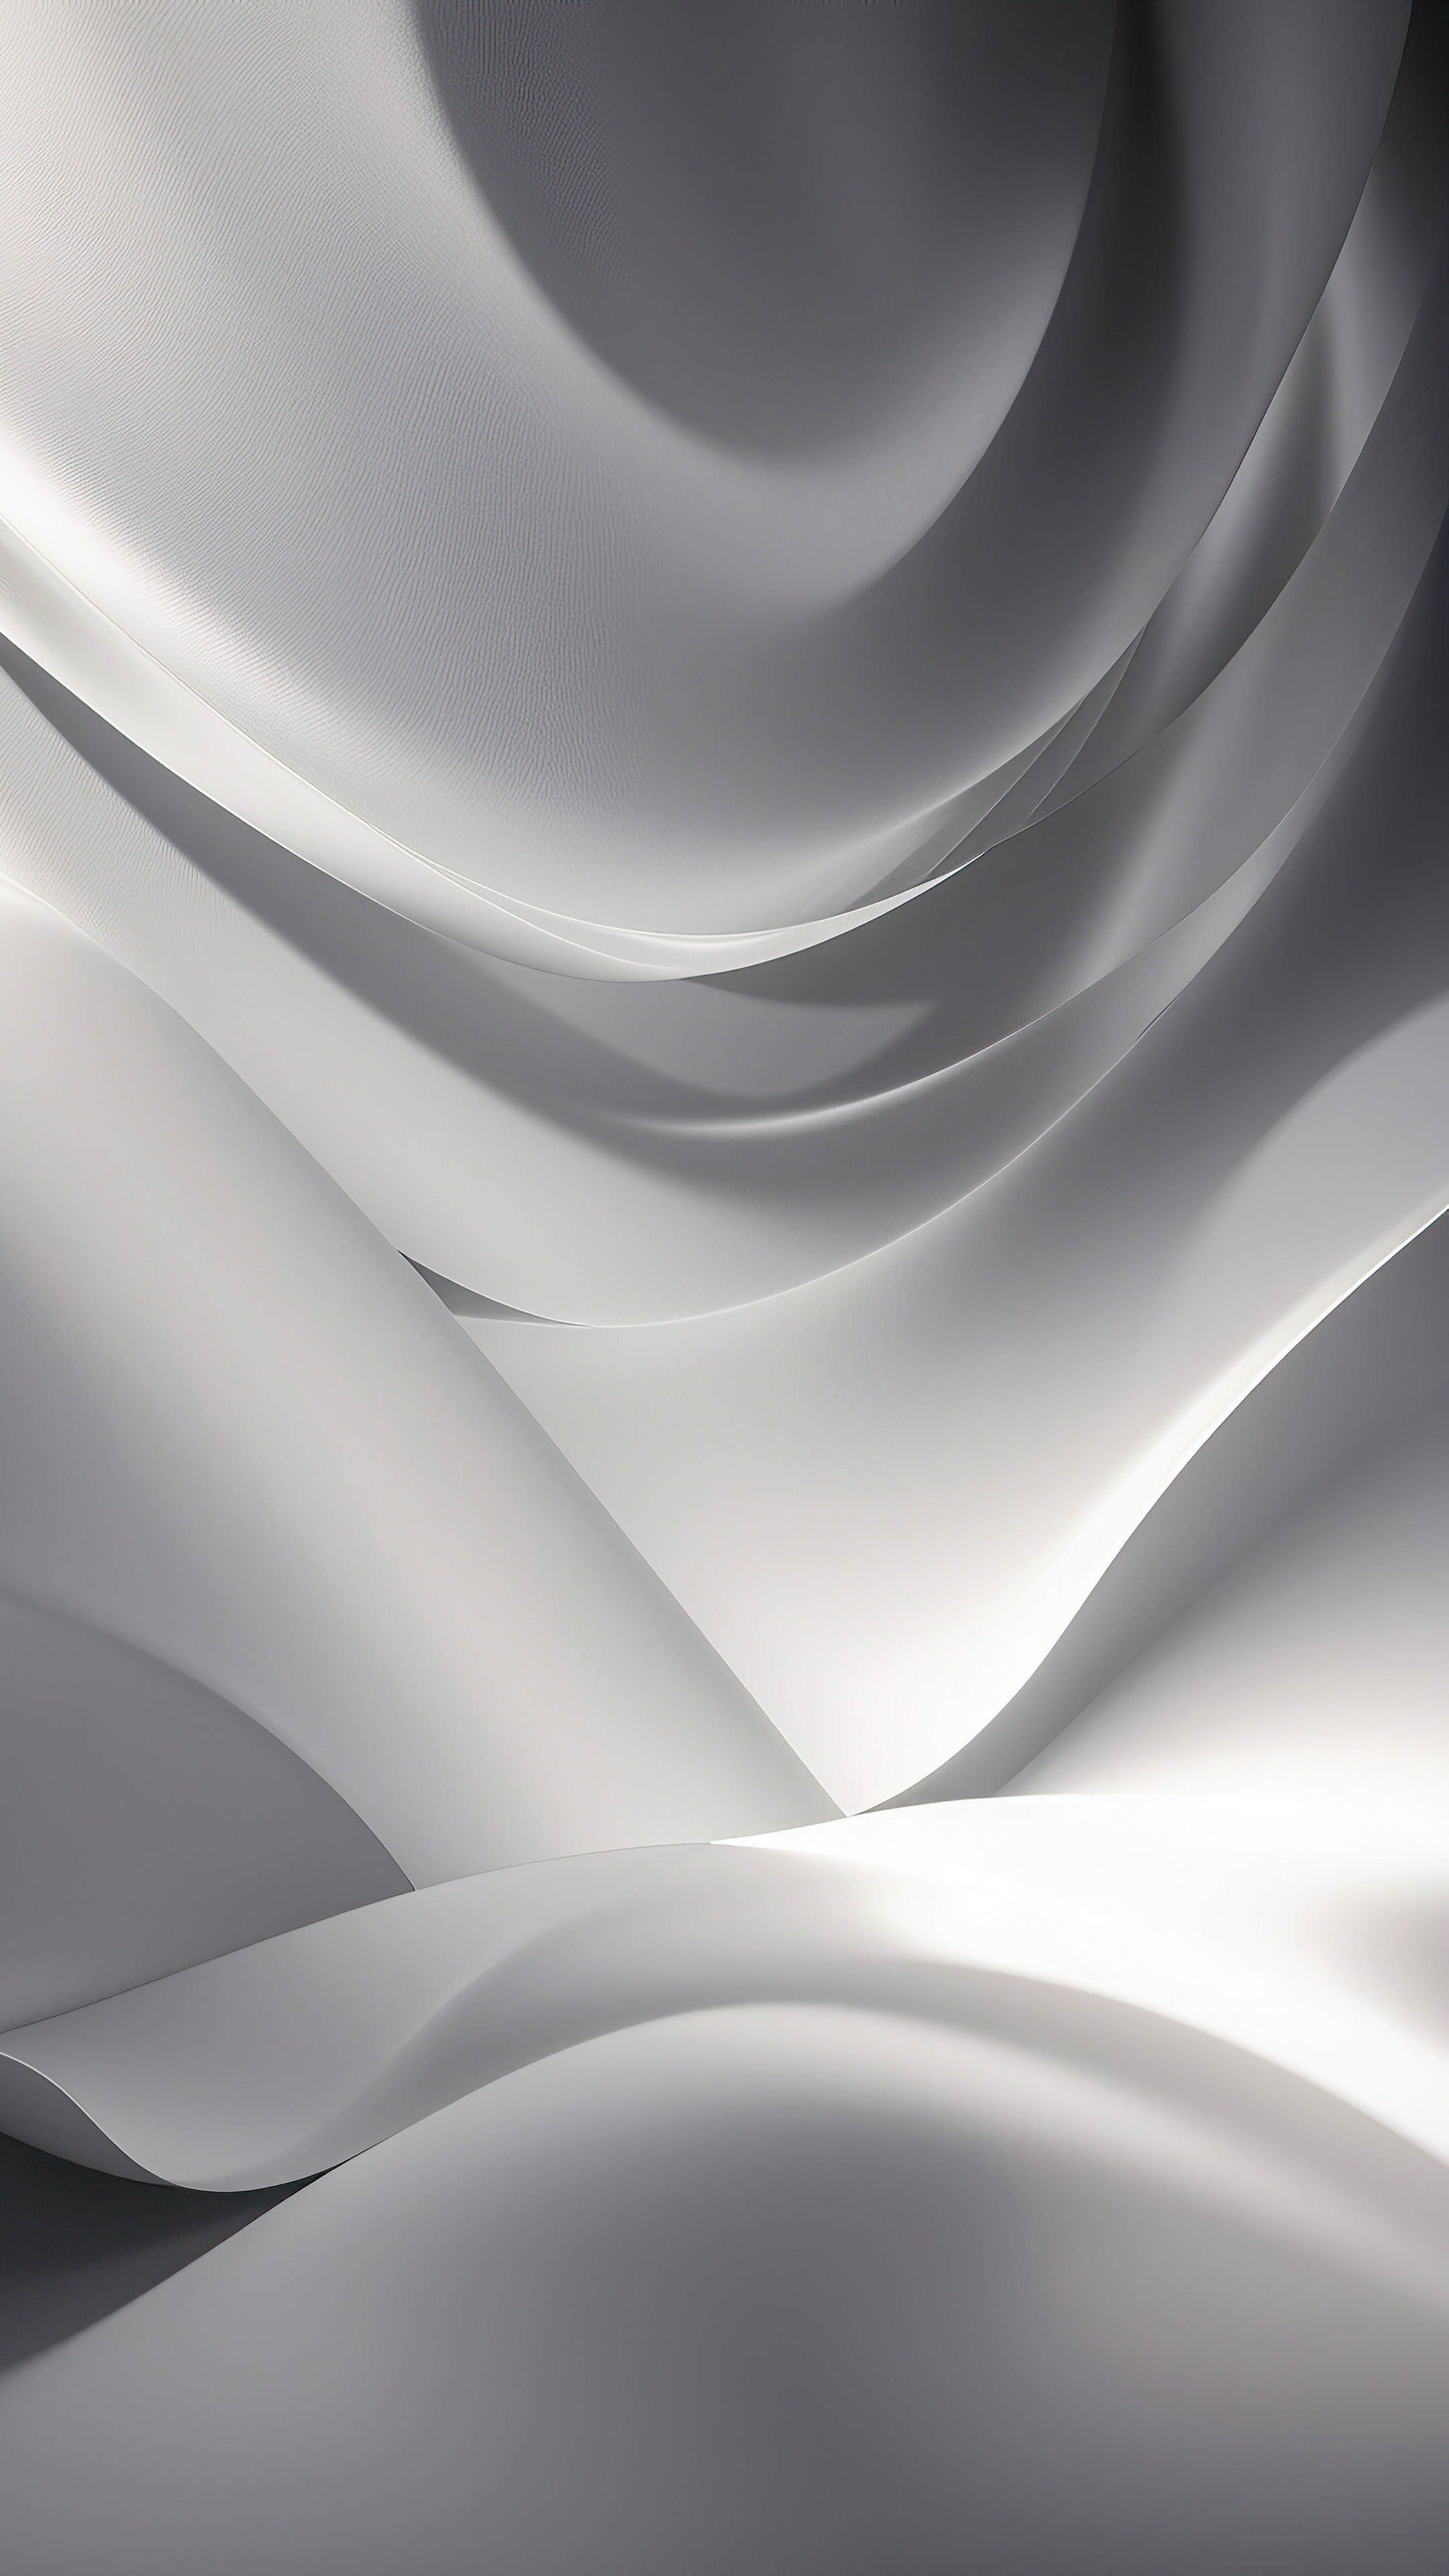 Experience the captivating interplay of light and shadow on your iPhone screen with abstract wallpaper in 4K resolution.